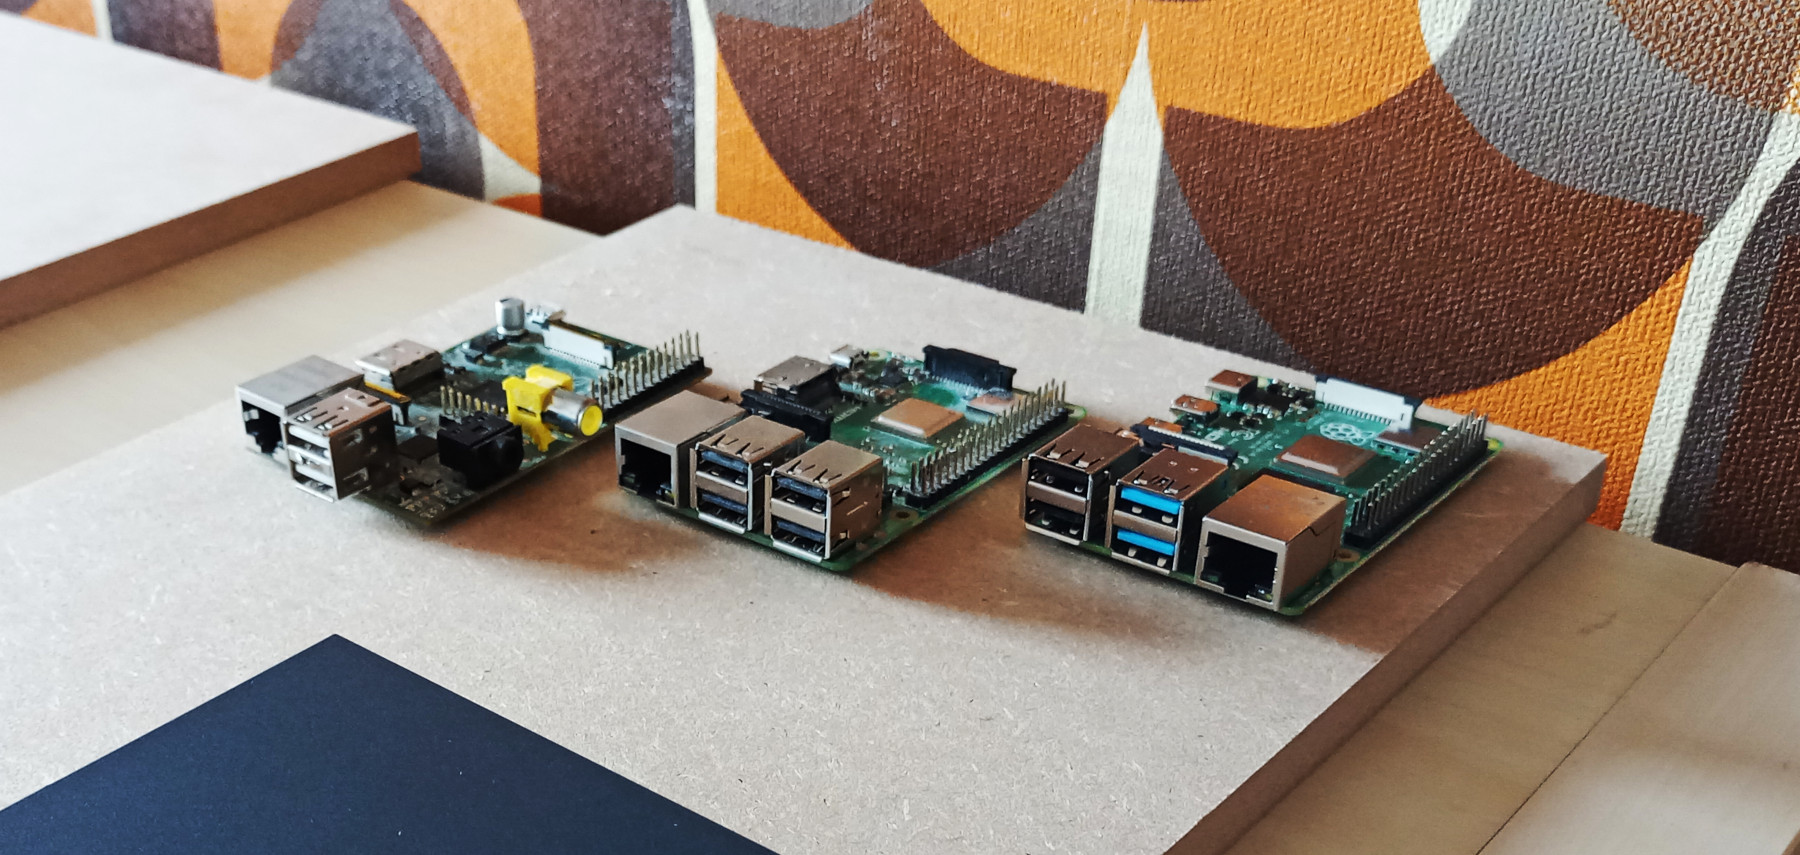 3 raspberry pis on a piece of wood